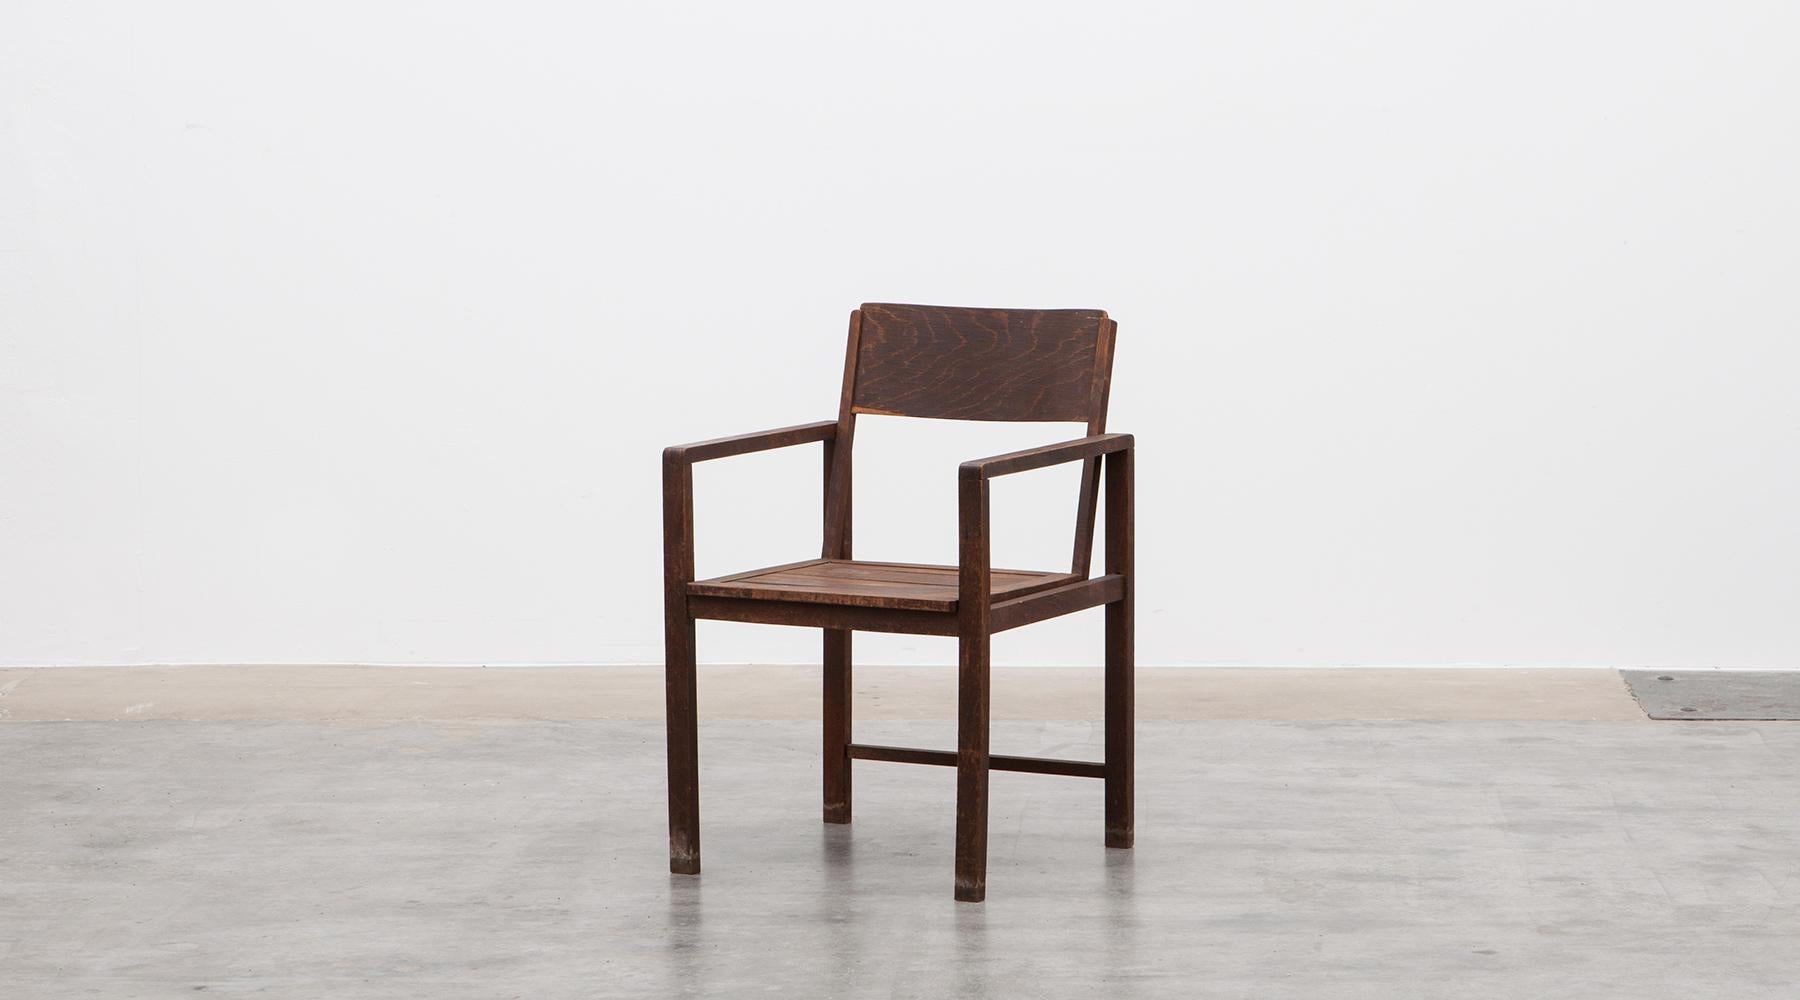 Stained beech chair by Erich Dieckmann, Germany, 1926.

The single chair by Erich Dieckmann from 1926 is made out of stained beech and has a typically, clear design. The rectangular Stand construction contrasts with the curved backrest in plywood